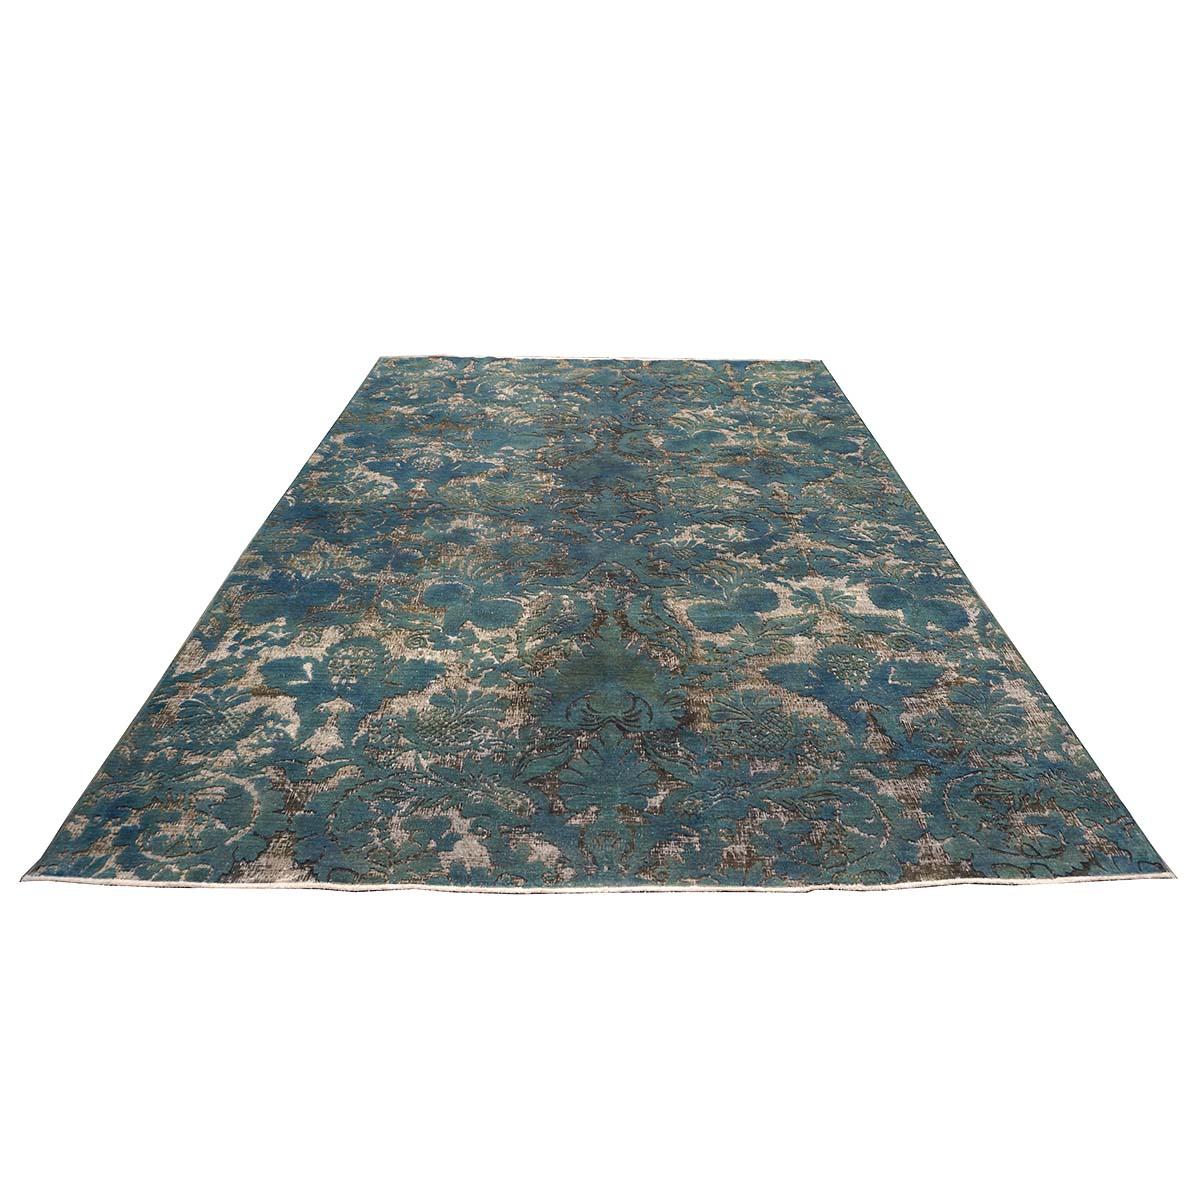 Ashly Fine Rugs presents a new distressed modern Afghan rug. These rugs have been overdyed and distressed with a custom design to give them an antique feel, but yet a modern look. This piece was overdyed with a beautiful teal blue color, along with